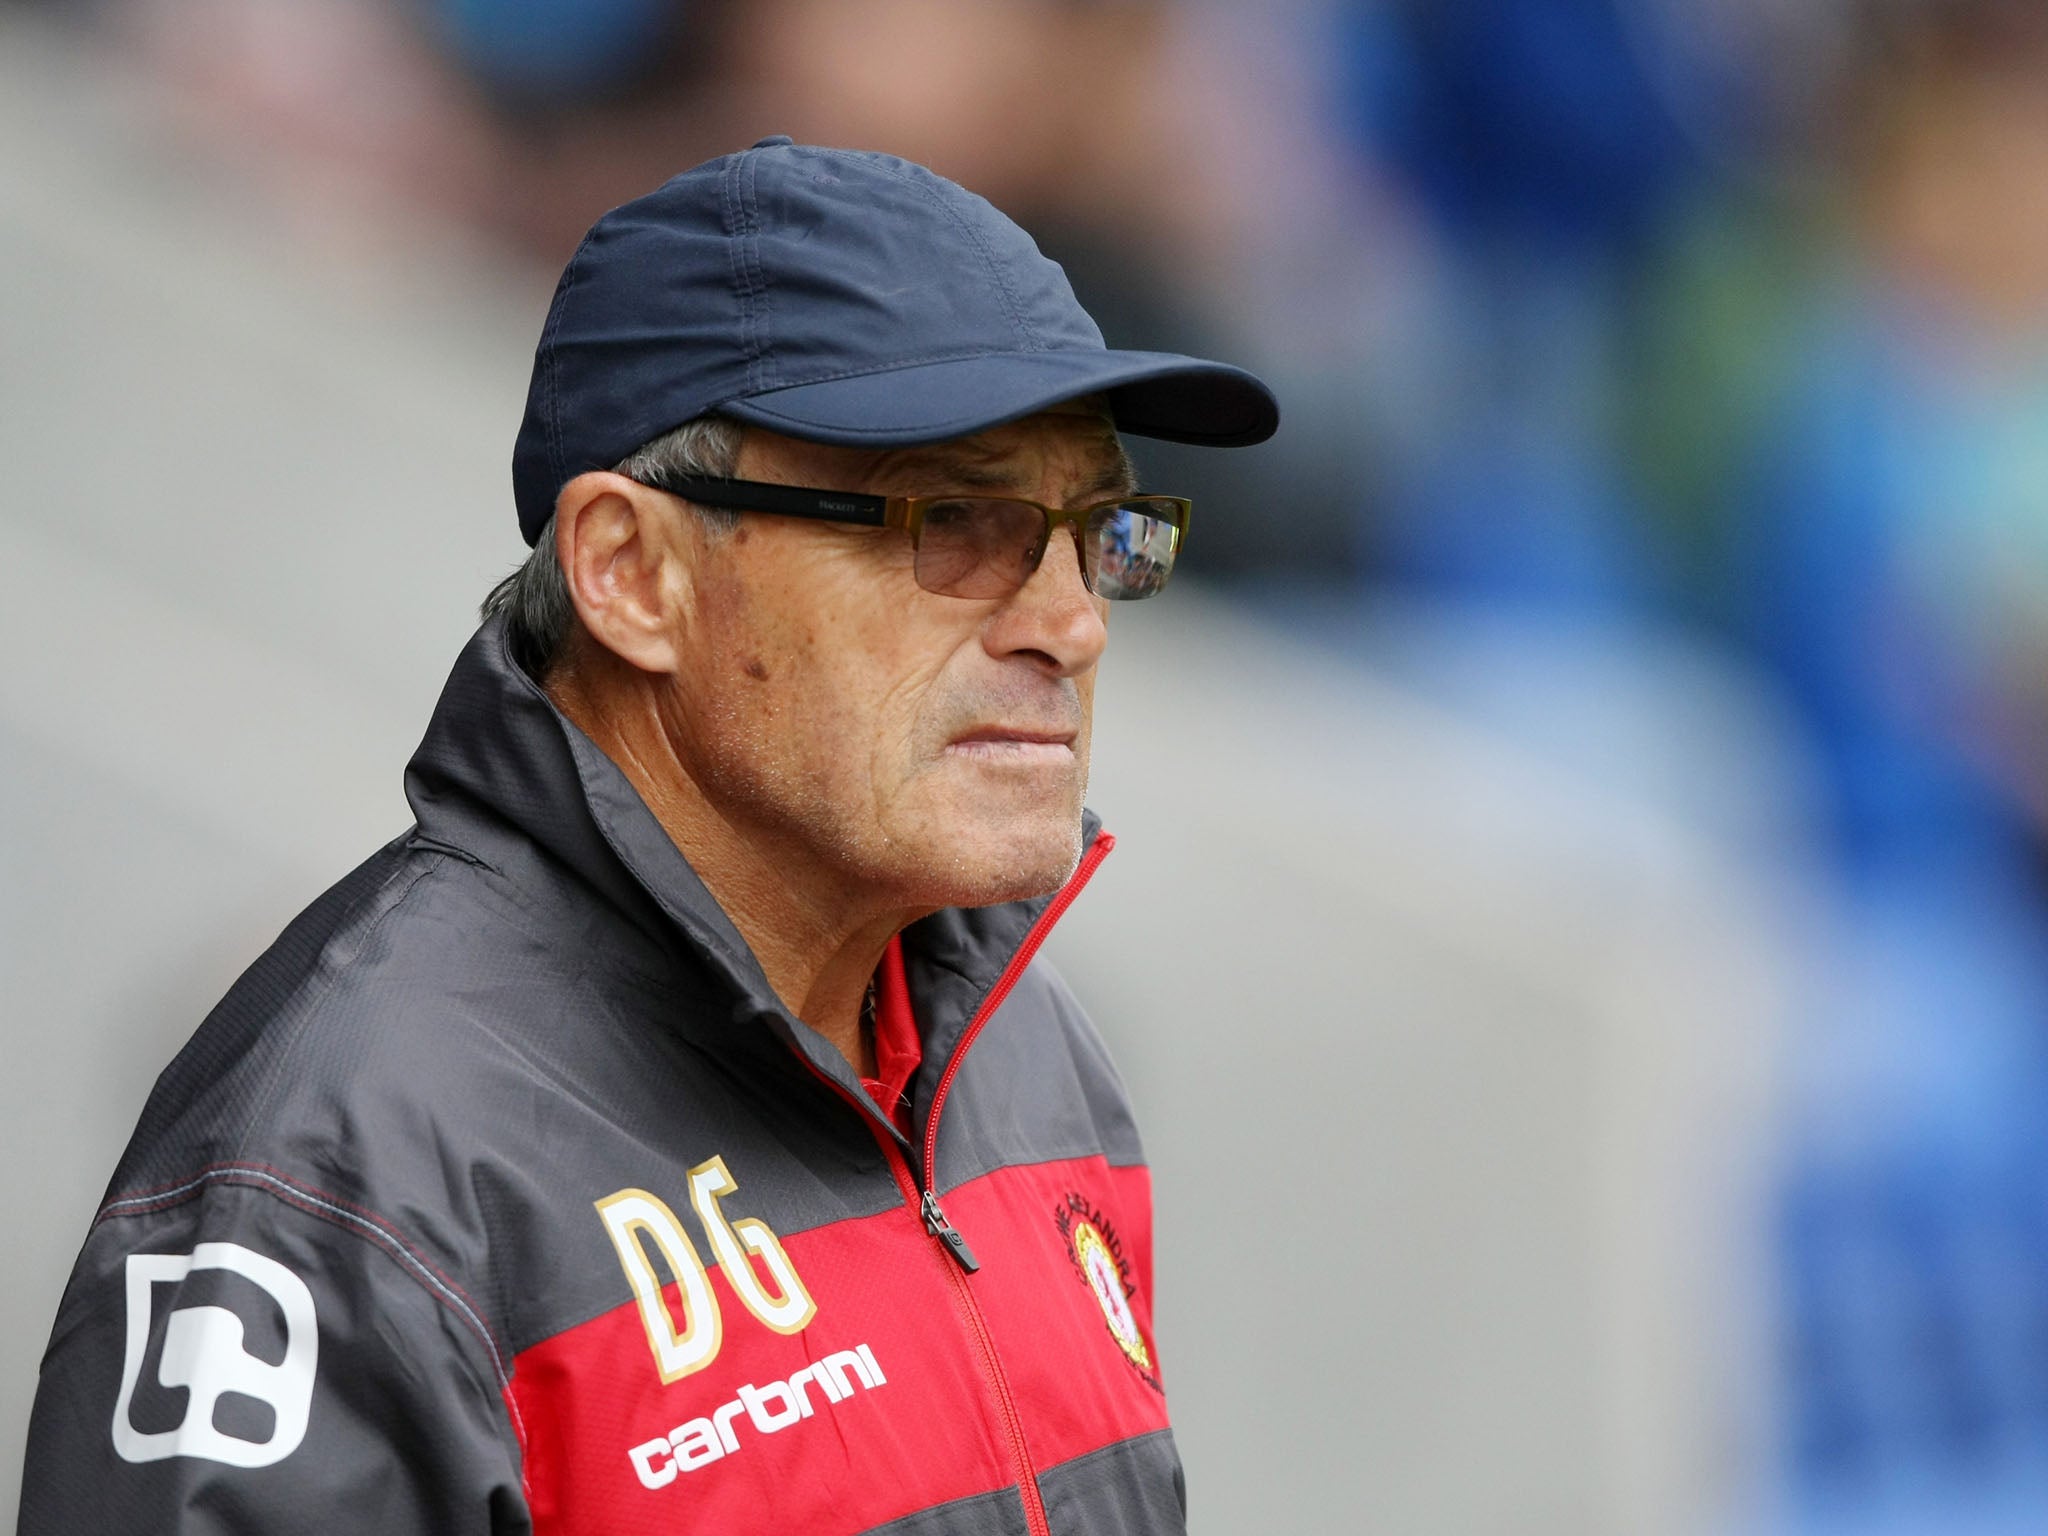 Dario Gradi is accused of attempting to smooth over allegations of Heath assaulting a youth player